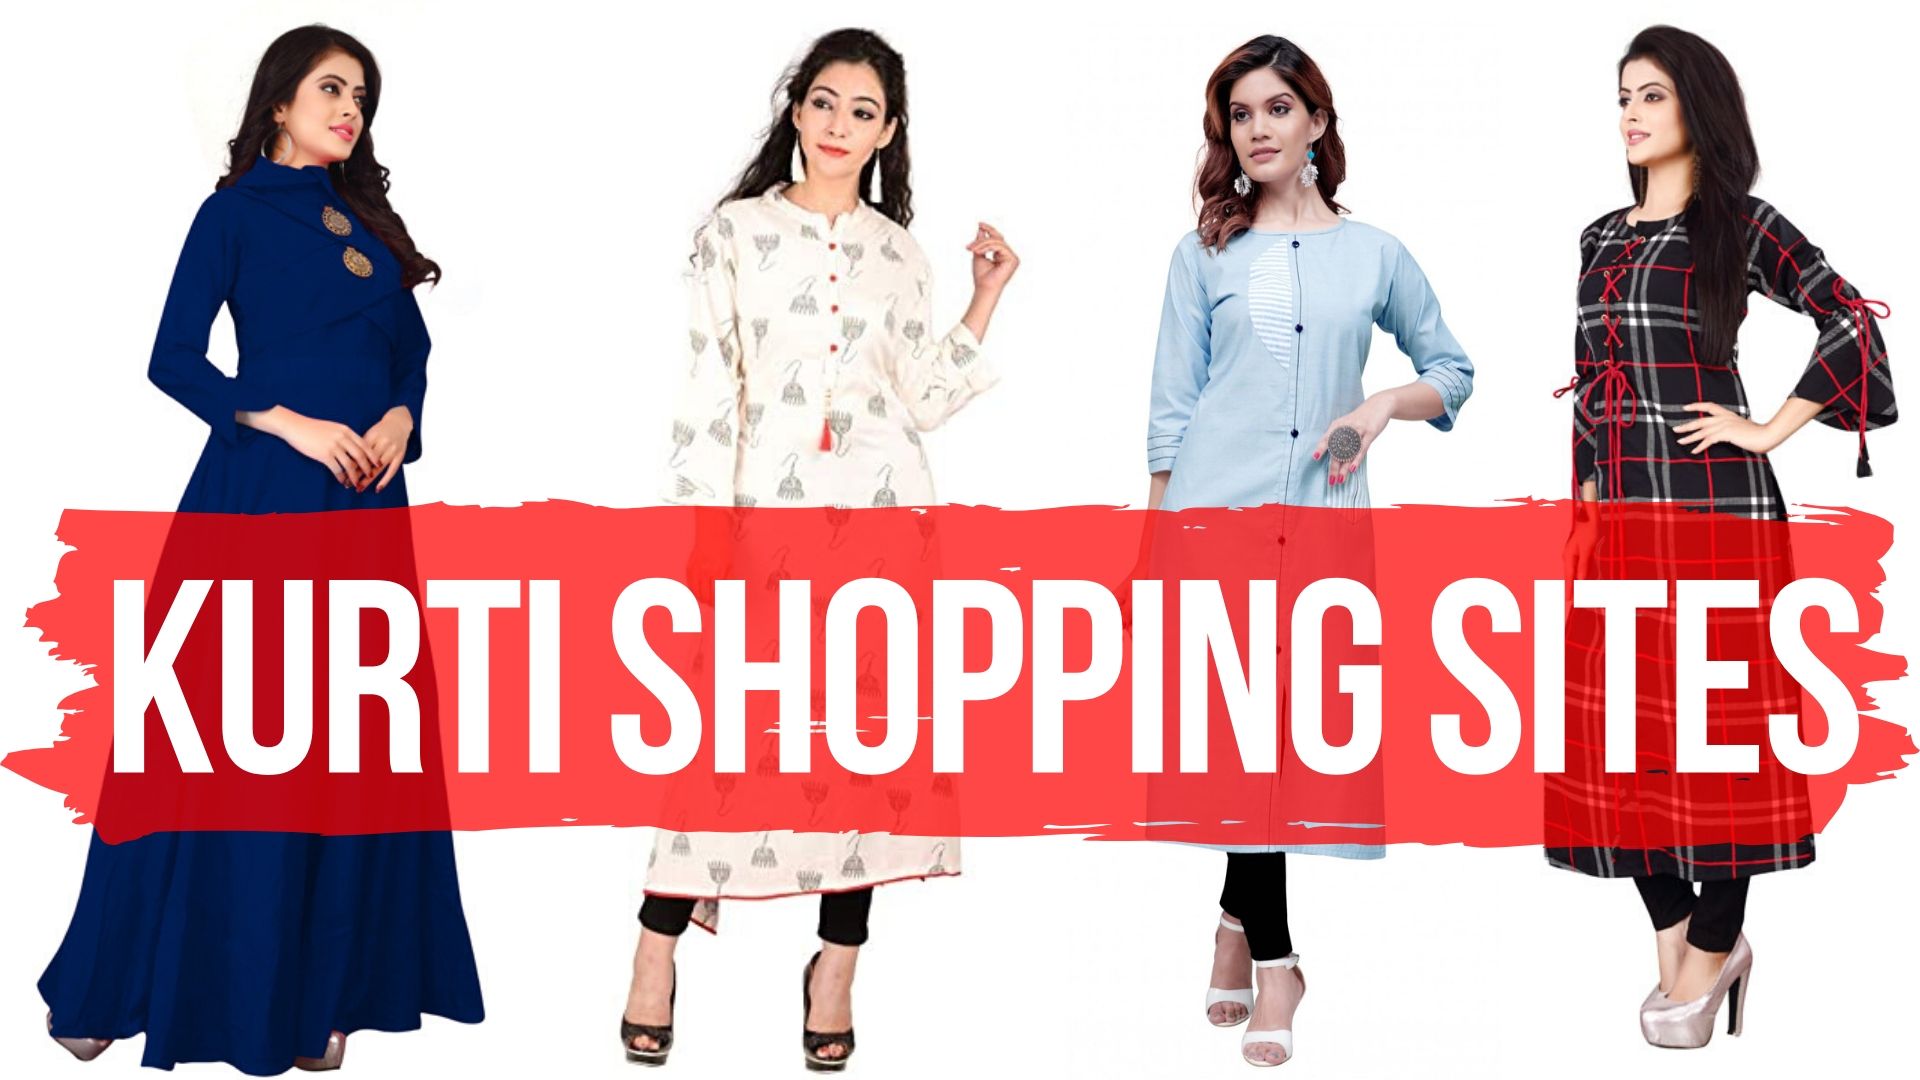 Why buy Kurtis online from popular shopping sites